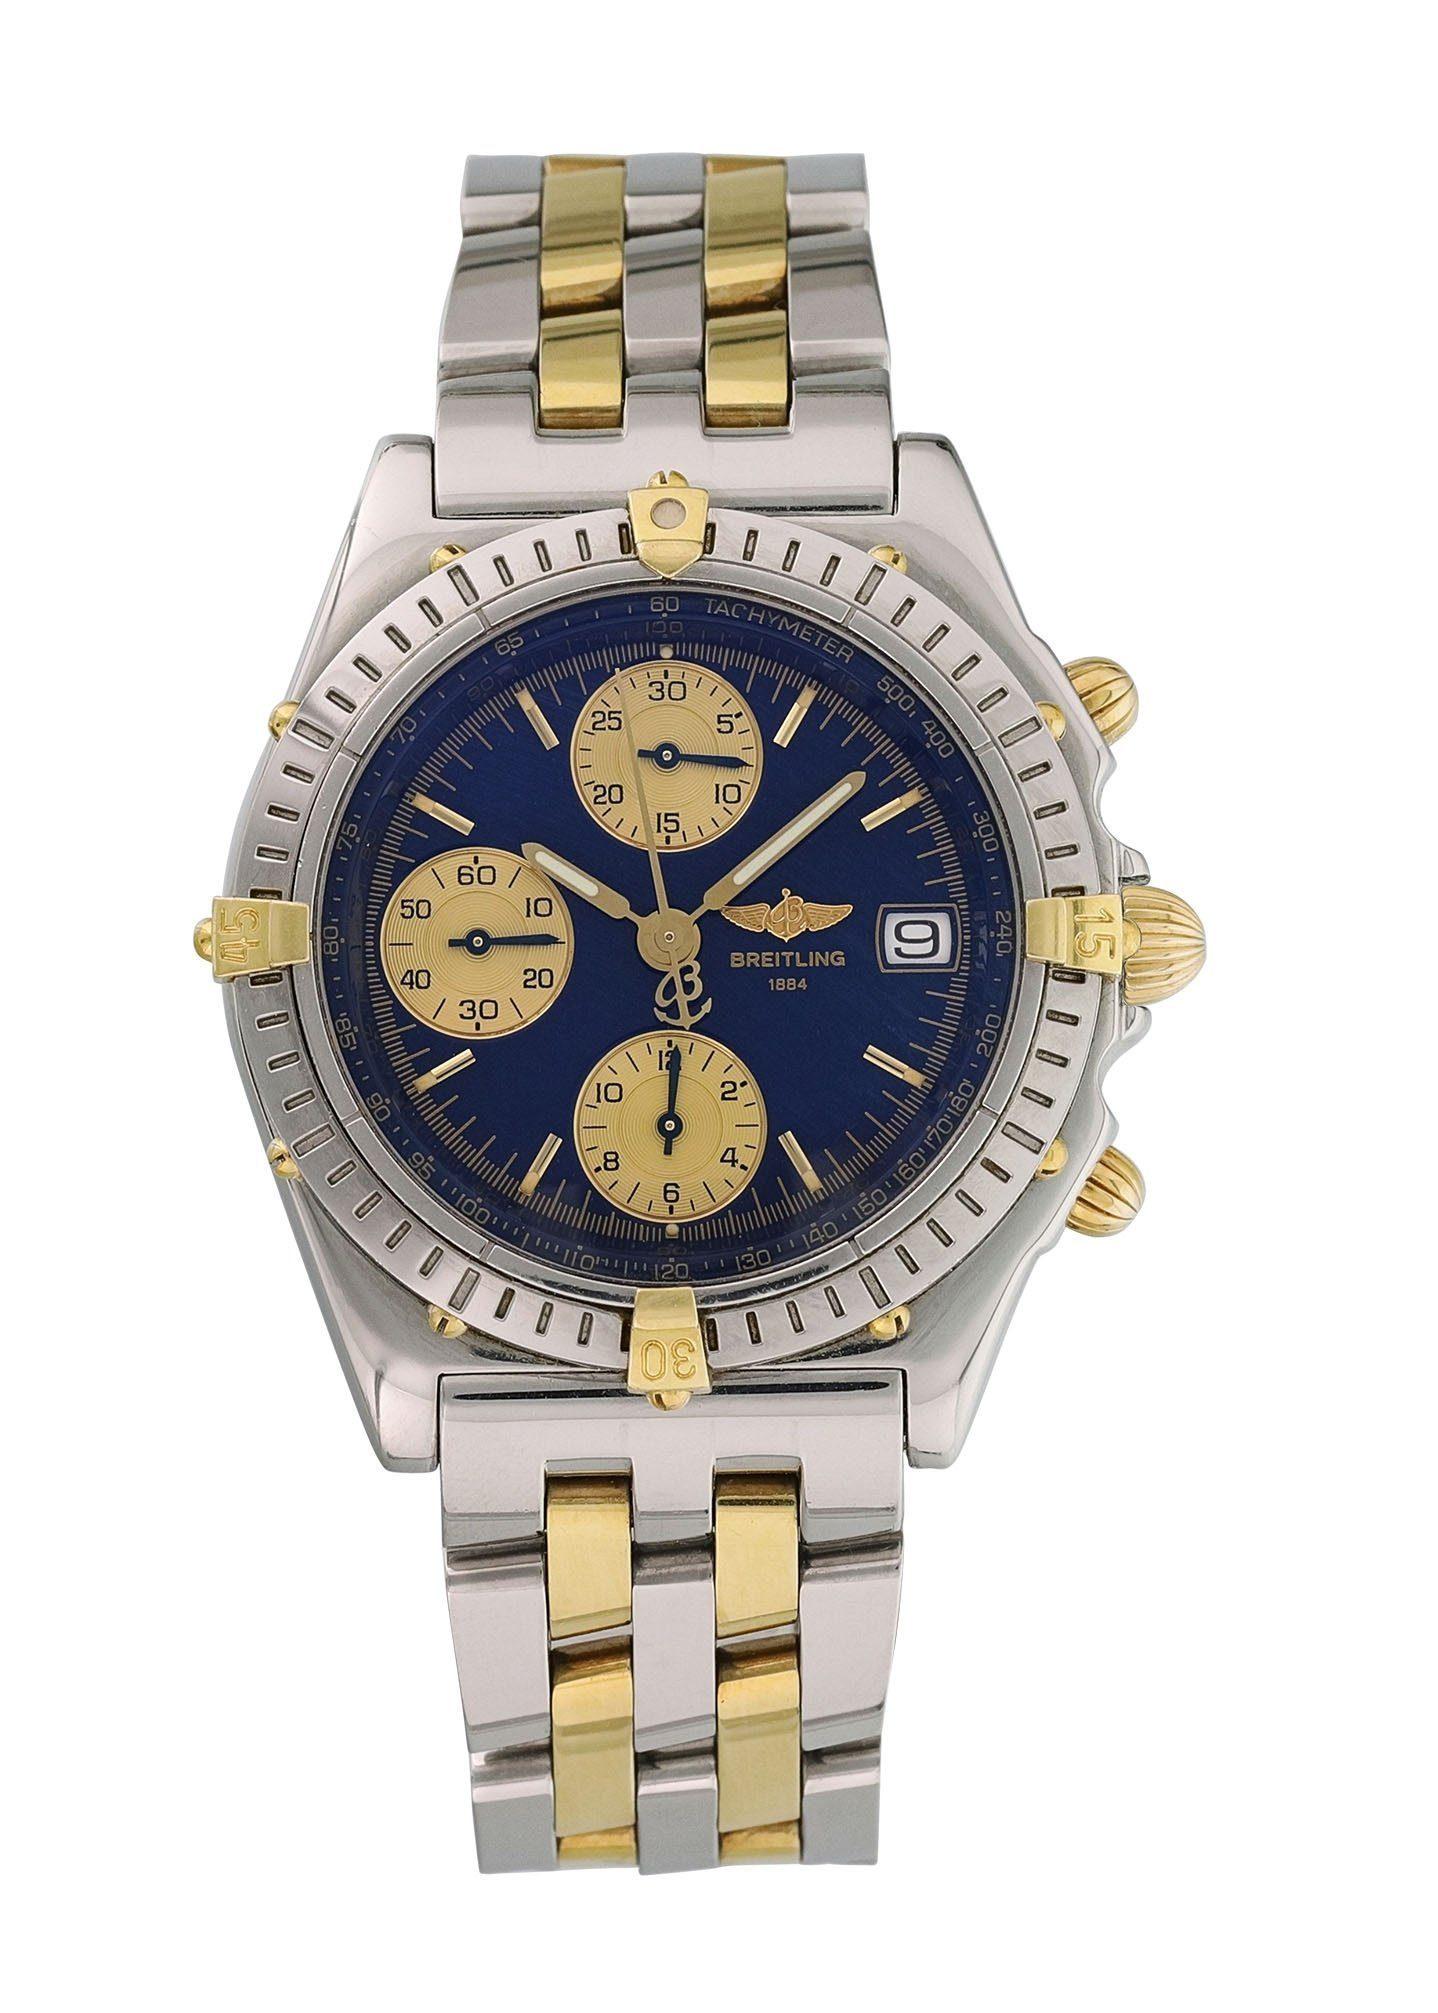 Breitling Chronomat B130501 Men's Watch.
Breitling Chronomat Professional B130501 Men Watch. 
44mm Stainless Steel case. 
Stainless Steel Unidirectional rotating bezel. 
Blue dial with luminous gold hands and index hour markers. 
Minute markers on